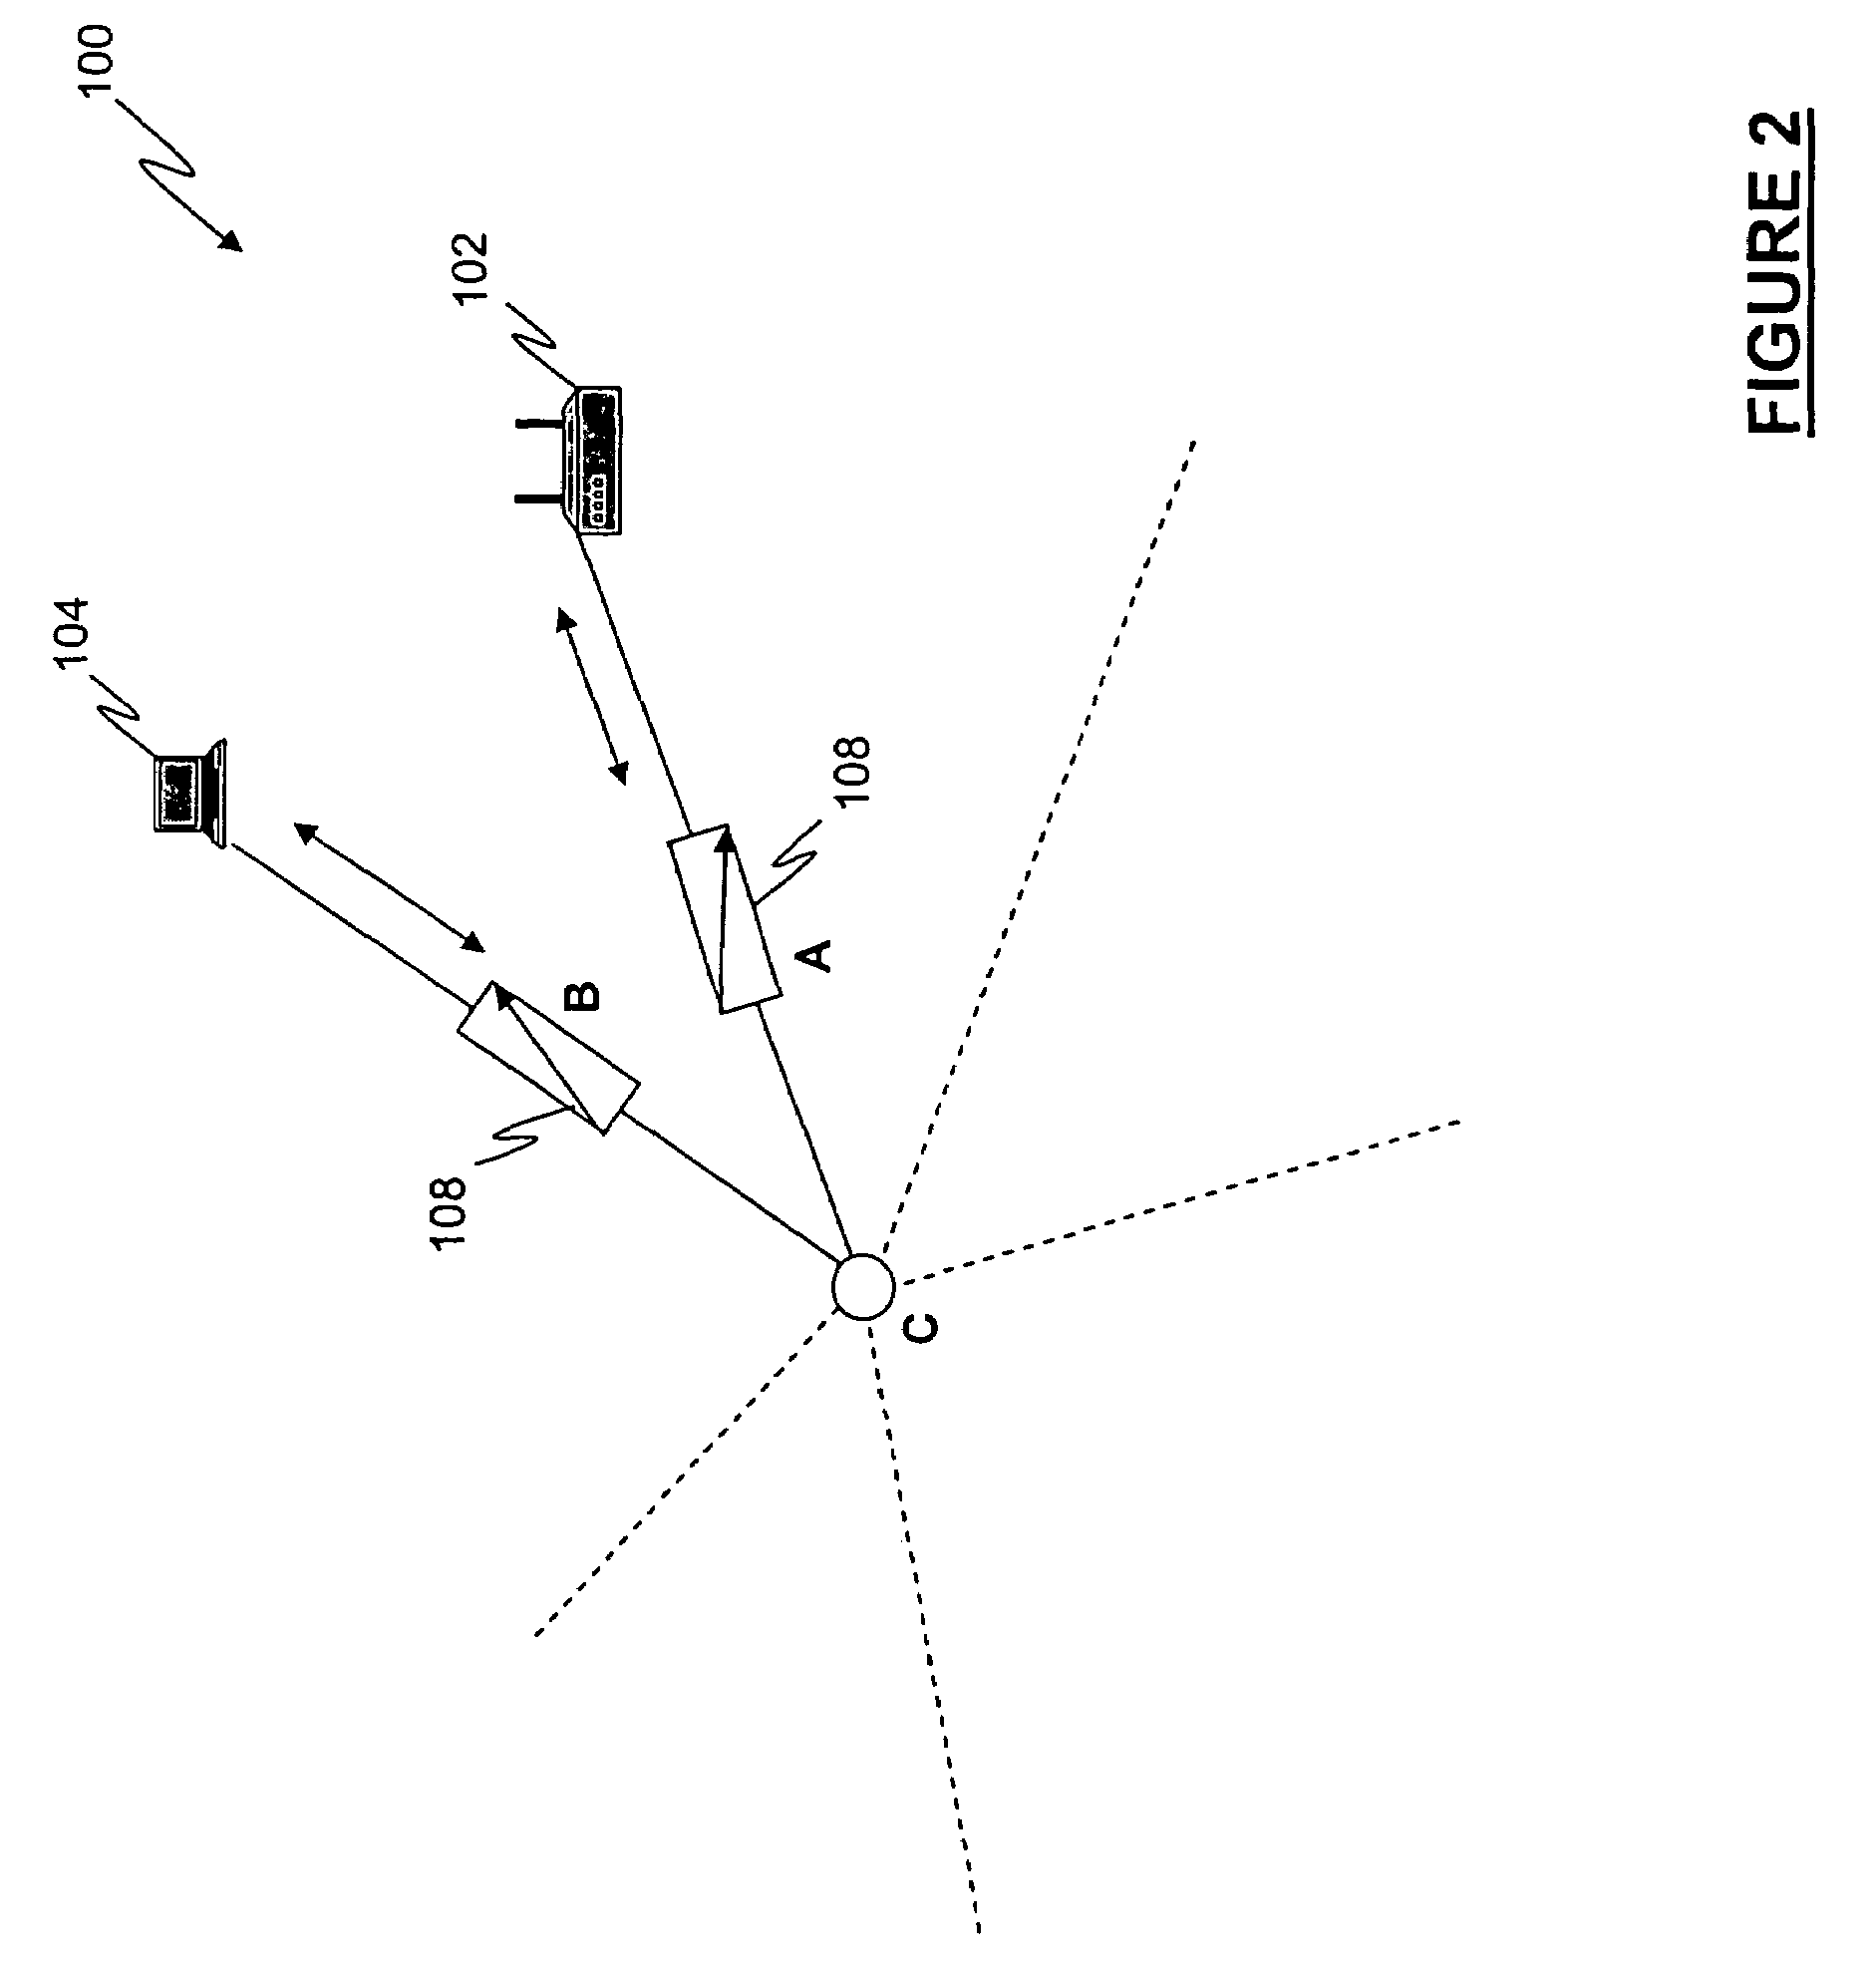 Test system for simulating a wireless environment and method of using same